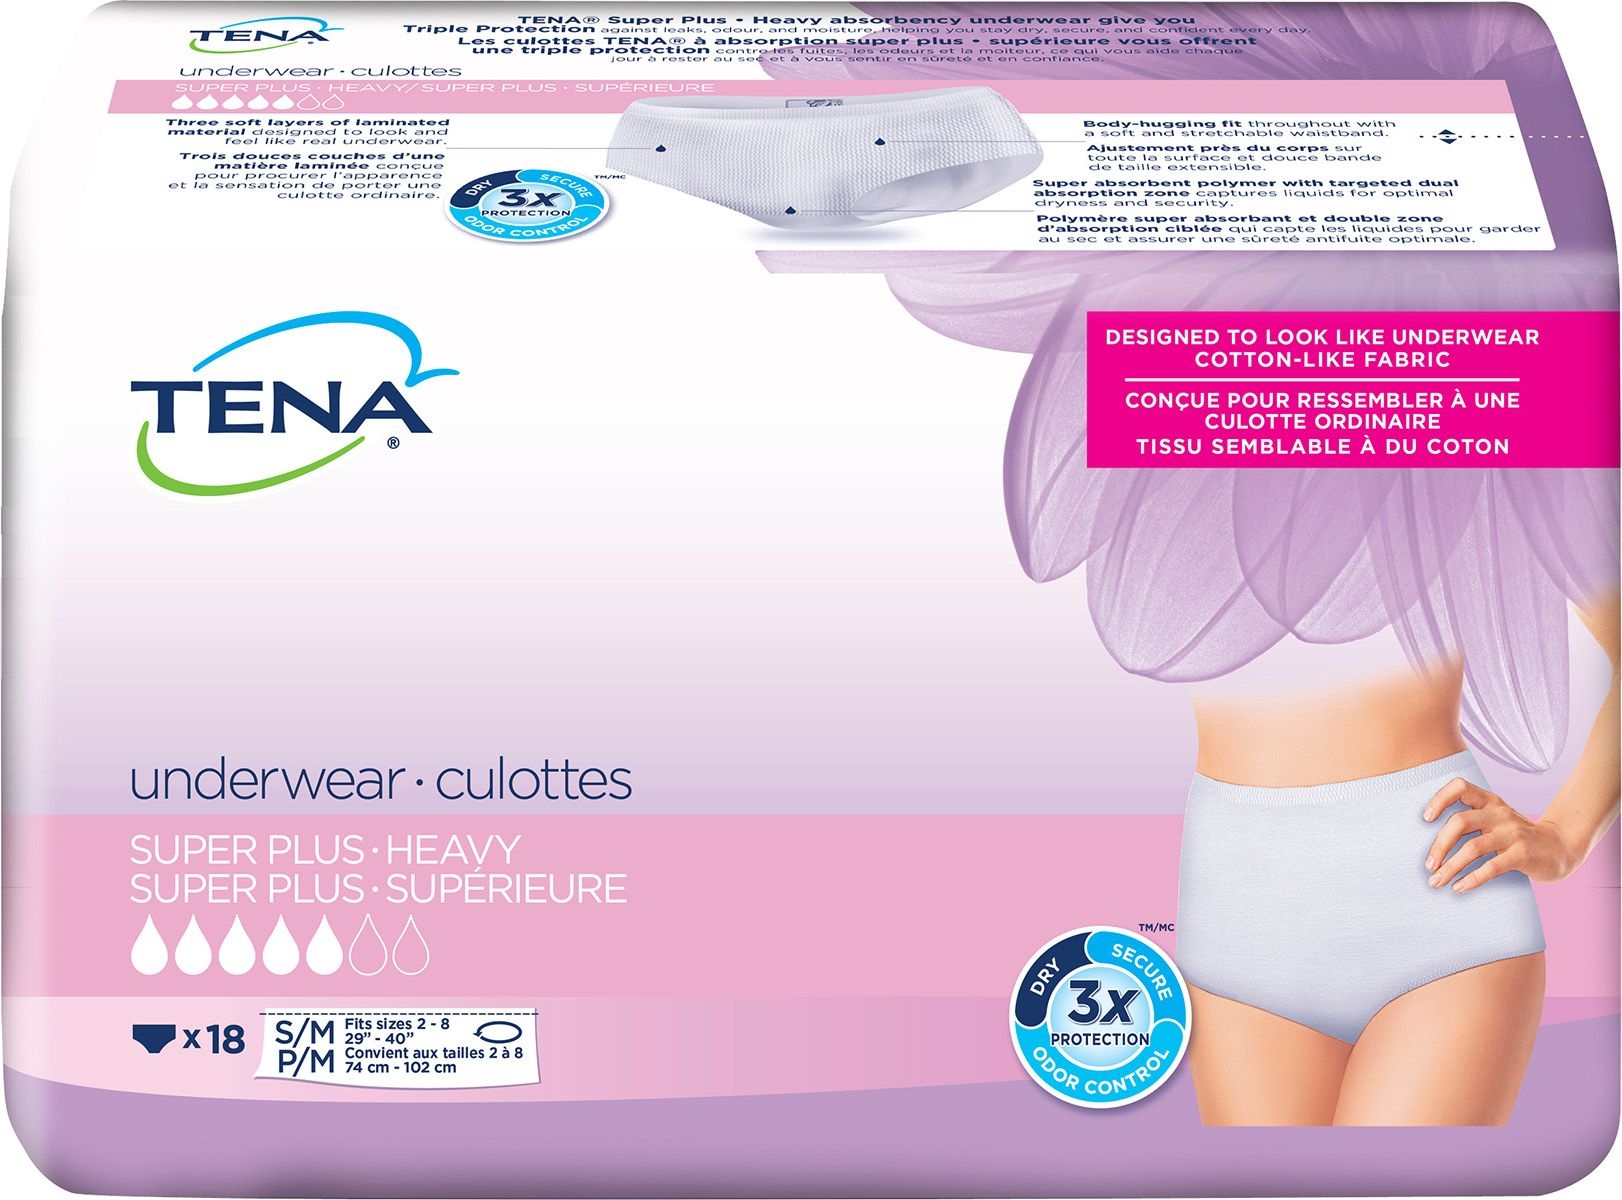 Prevail Per-Fit for Women Protective Underwear - Extra Absorbency - La